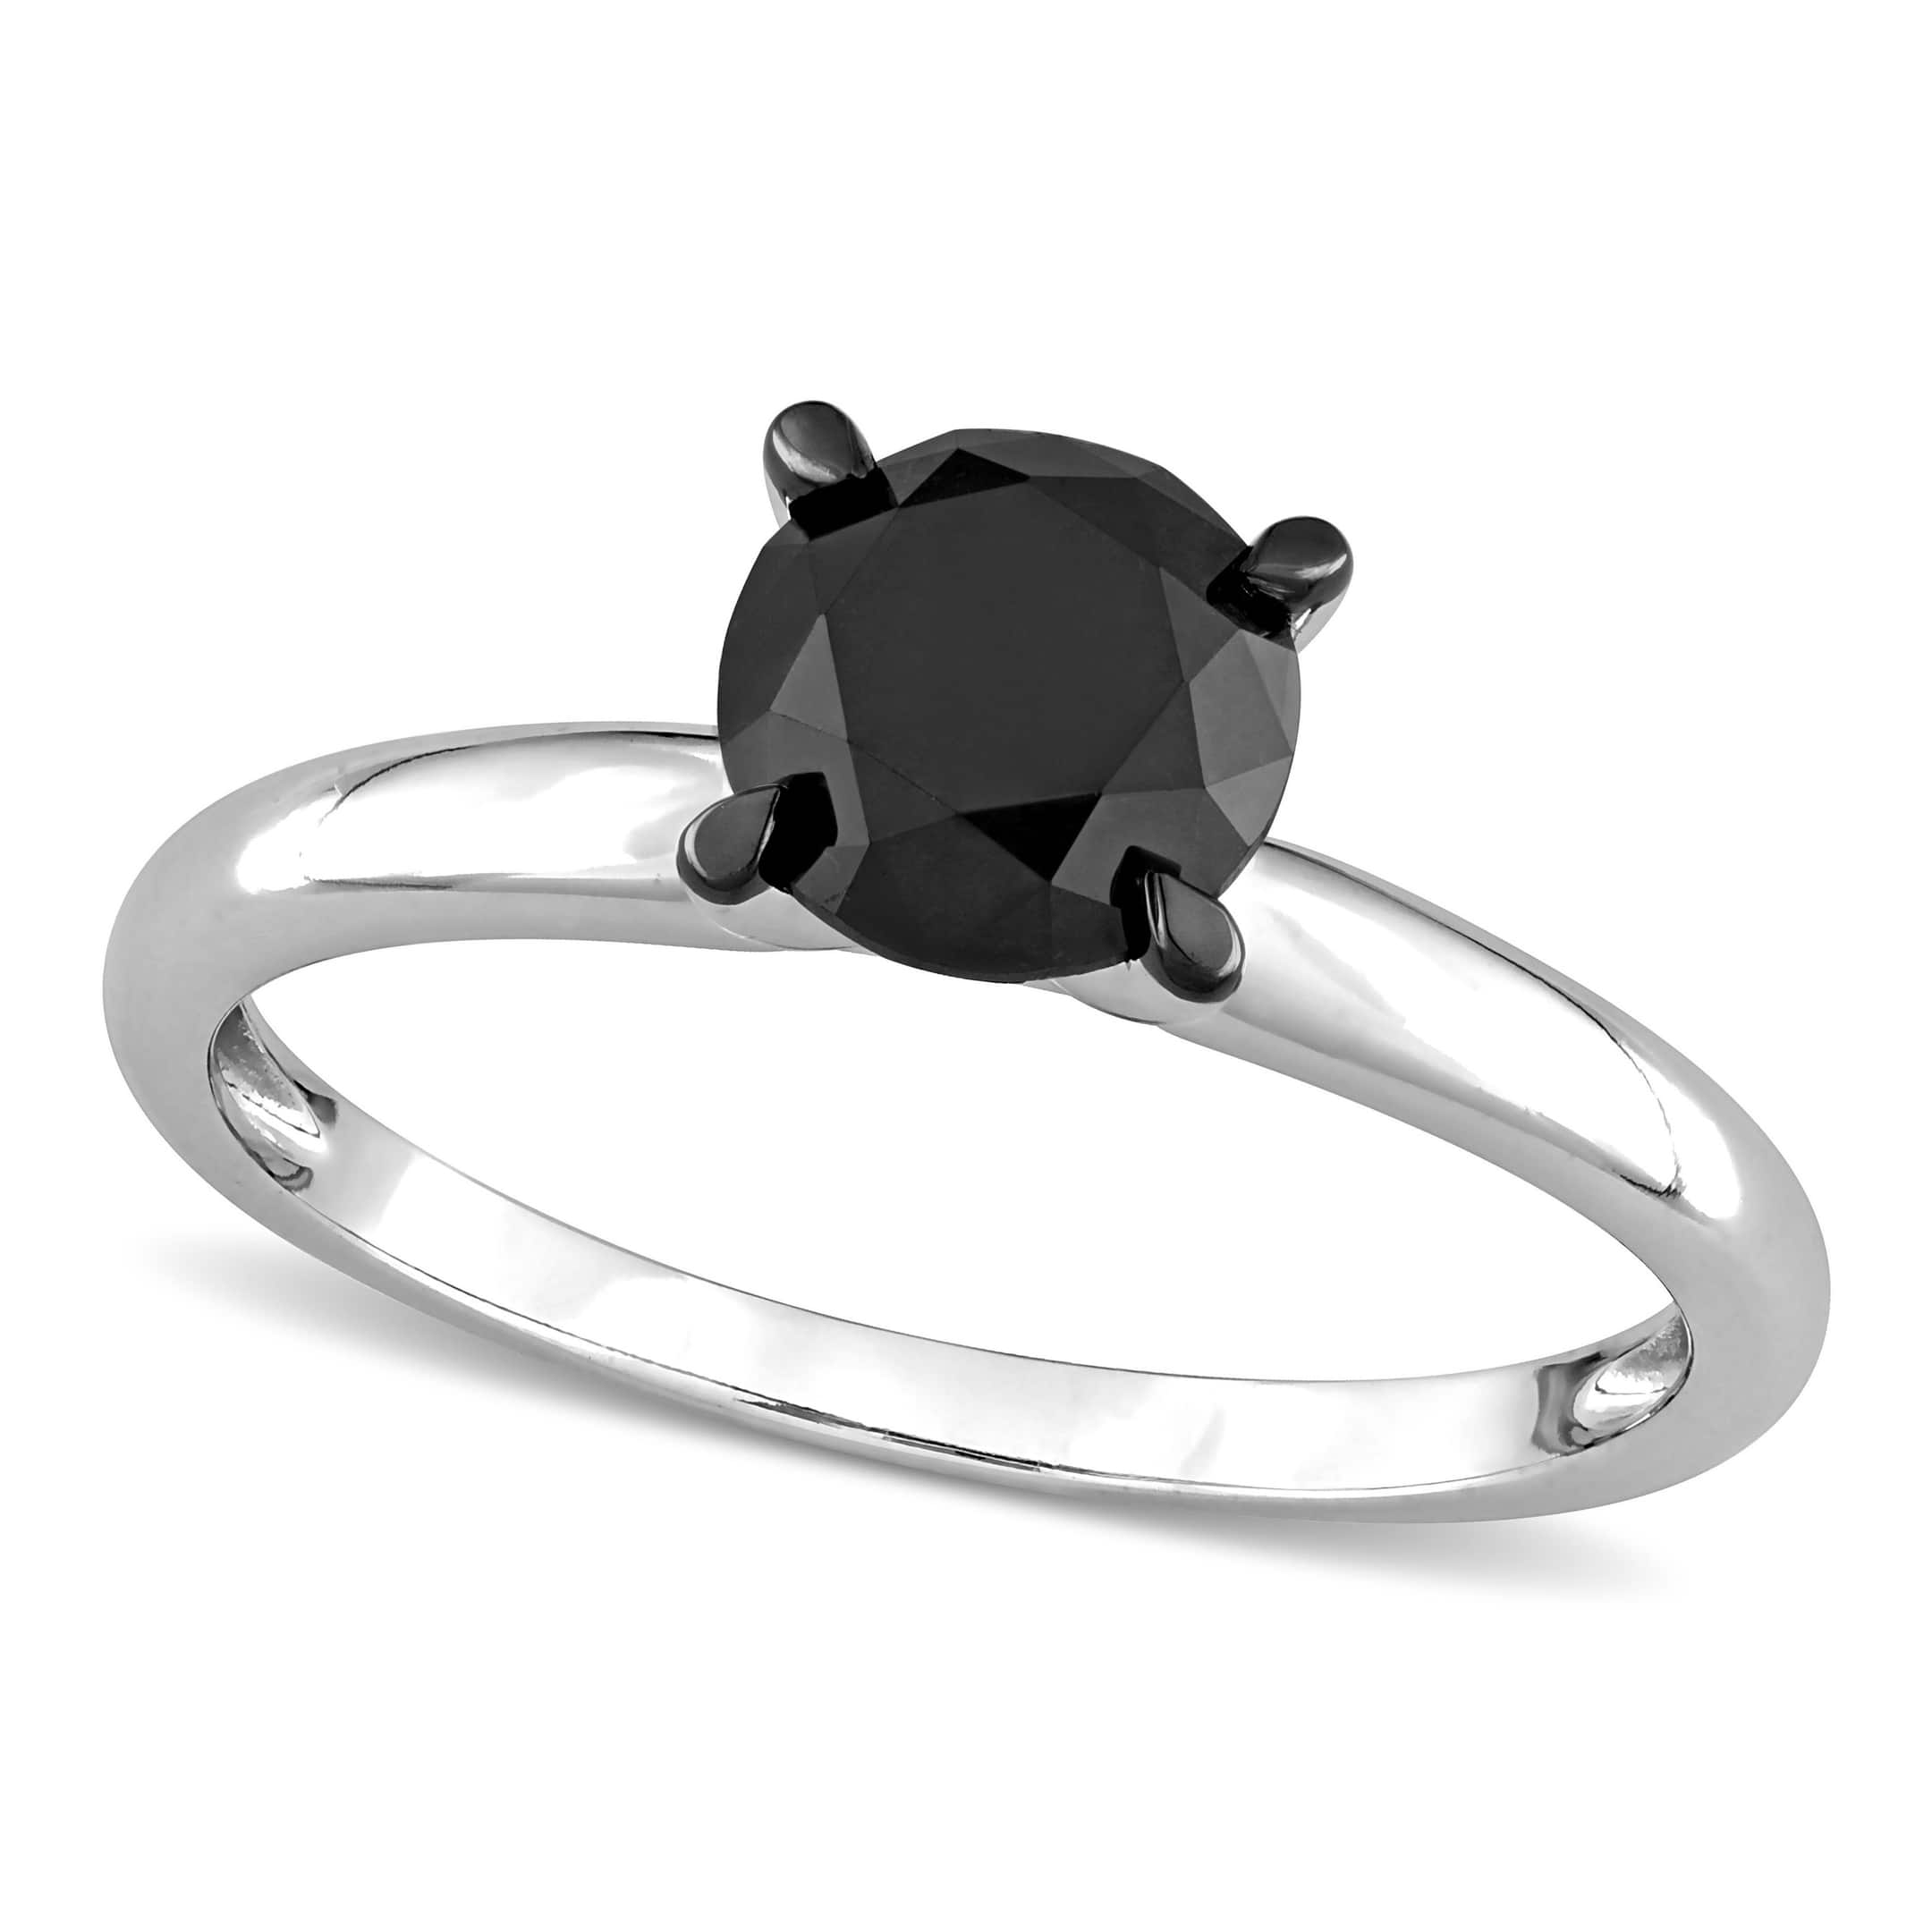 Round Cut Black Diamond Solitaire Ring in 14k White Gold (1.50ct)